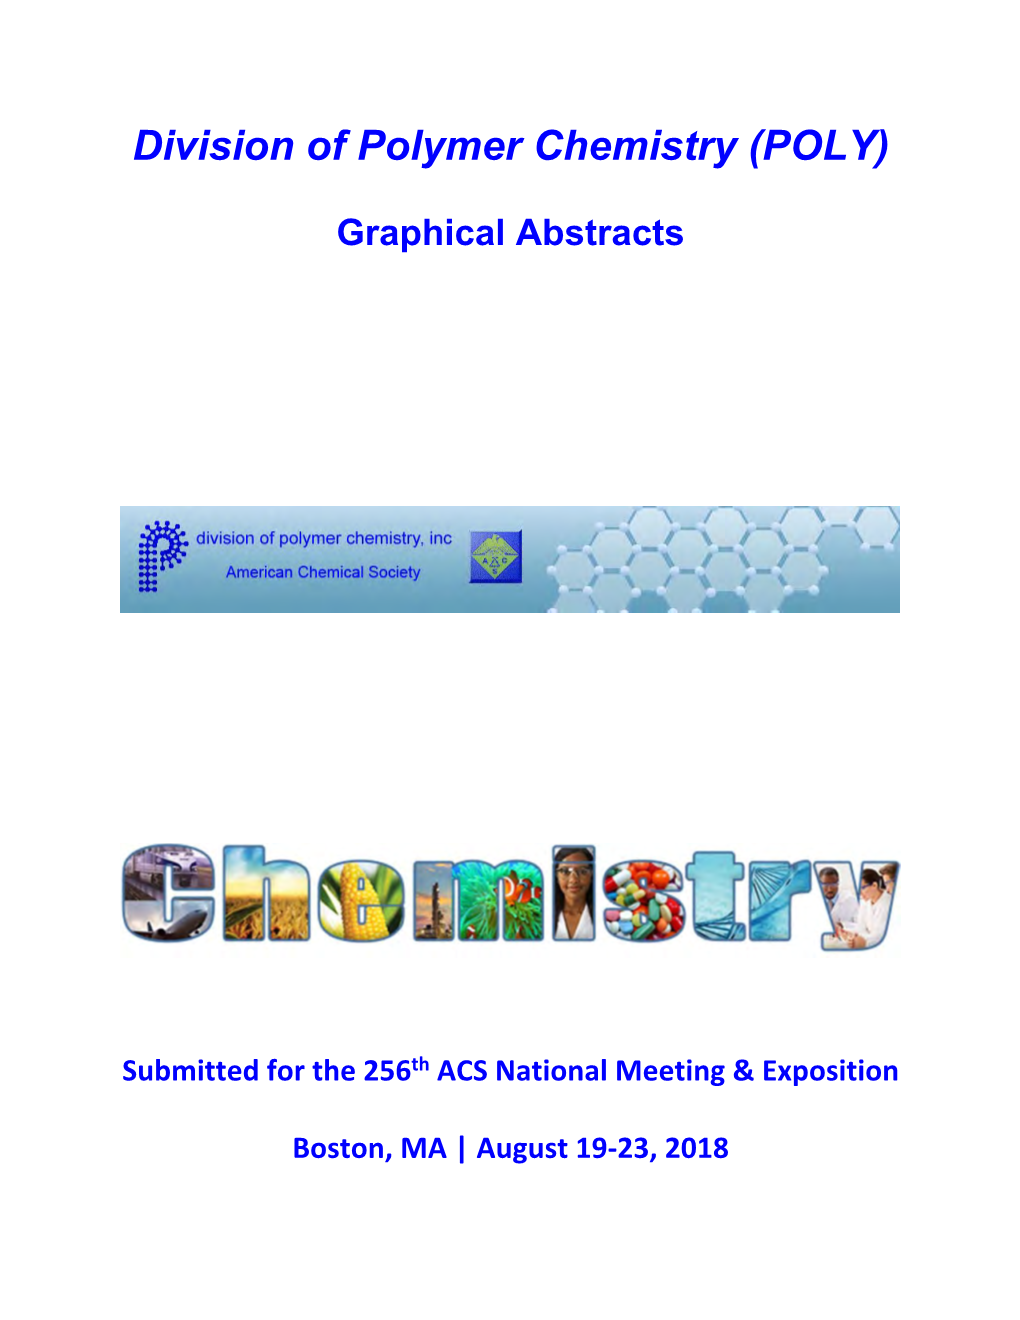 2018 Fall Graphical Abstracts